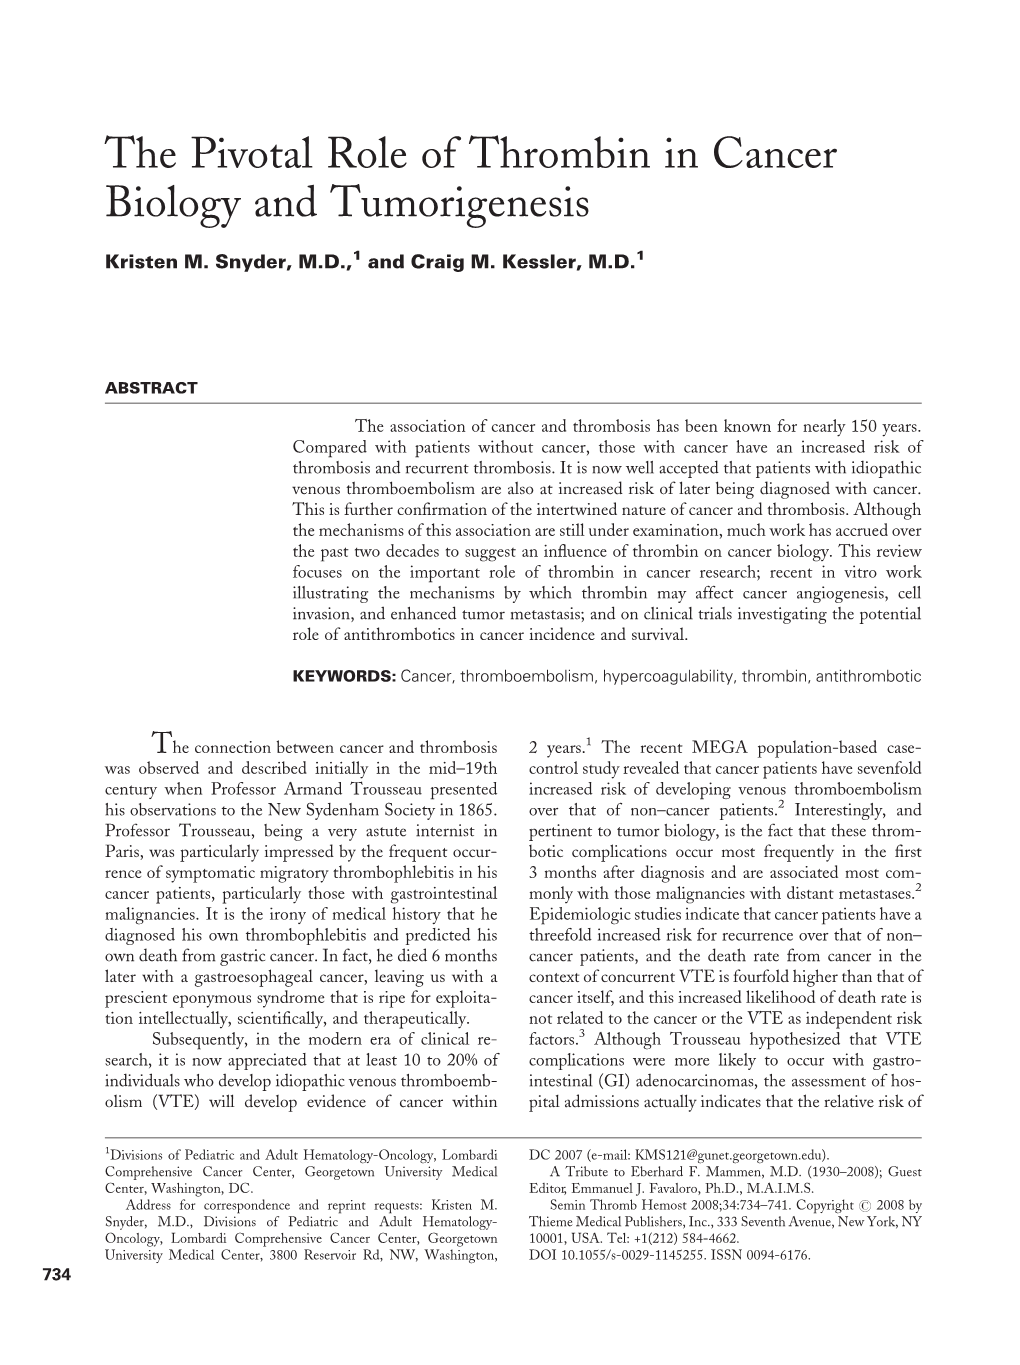 The Pivotal Role of Thrombin in Cancer Biology and Tumorigenesis